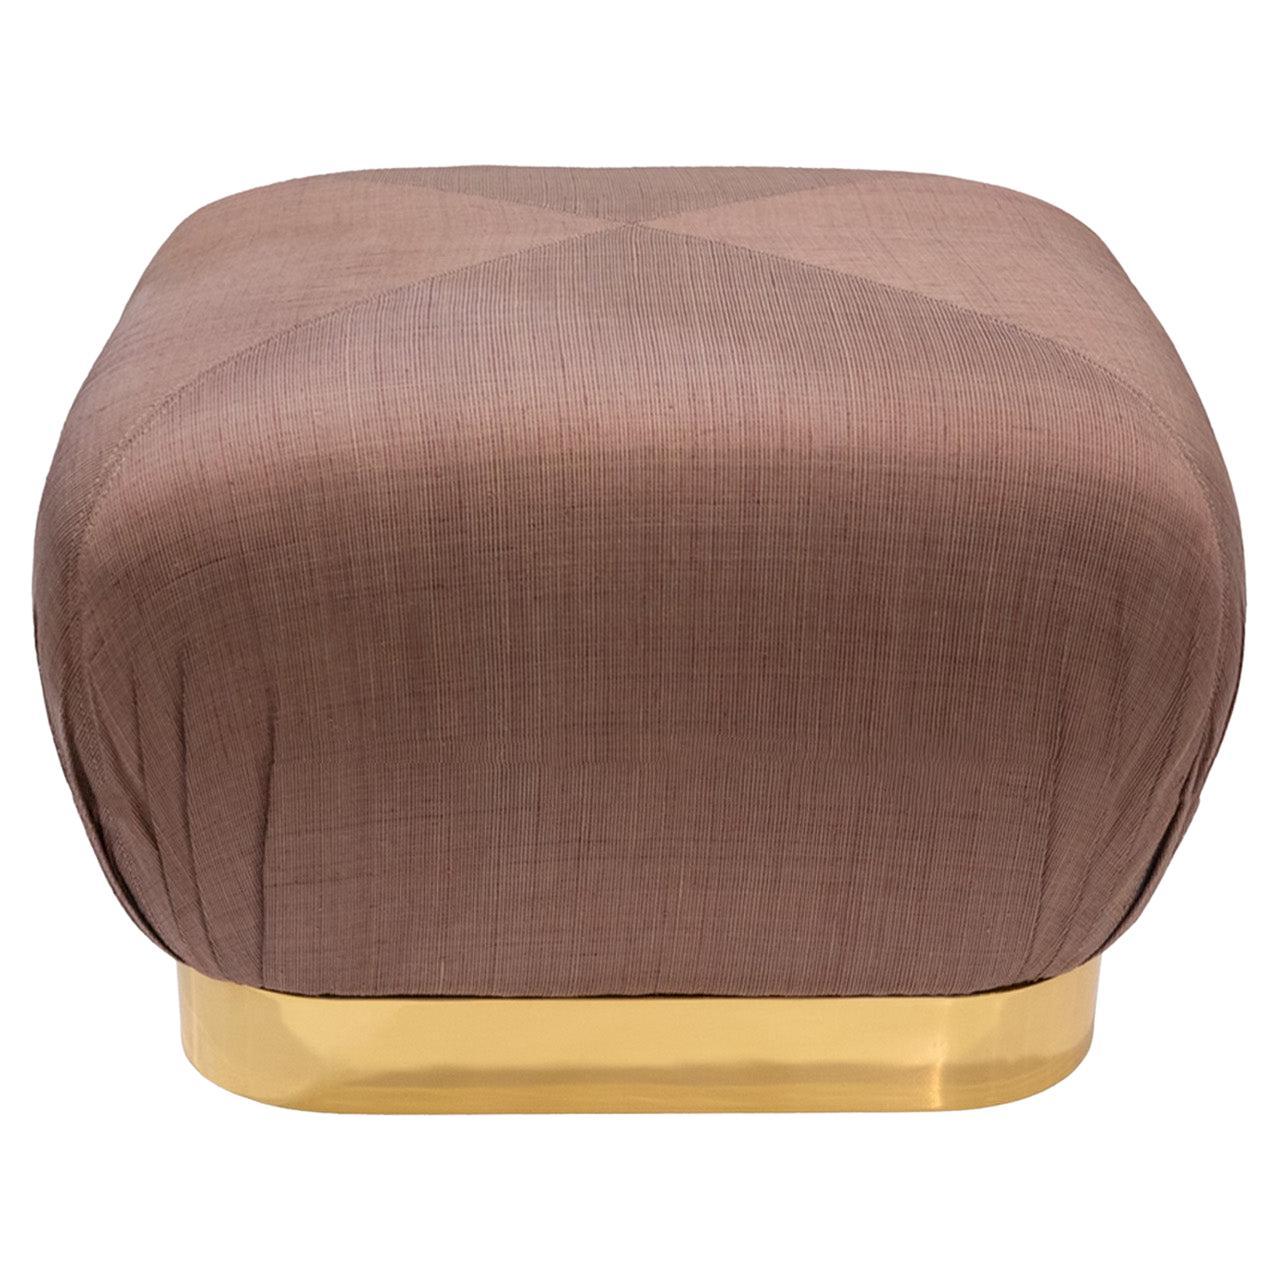 Karl Springer "Souffle Ottoman" with Brass Base and Silk Upholstery 1980s For Sale